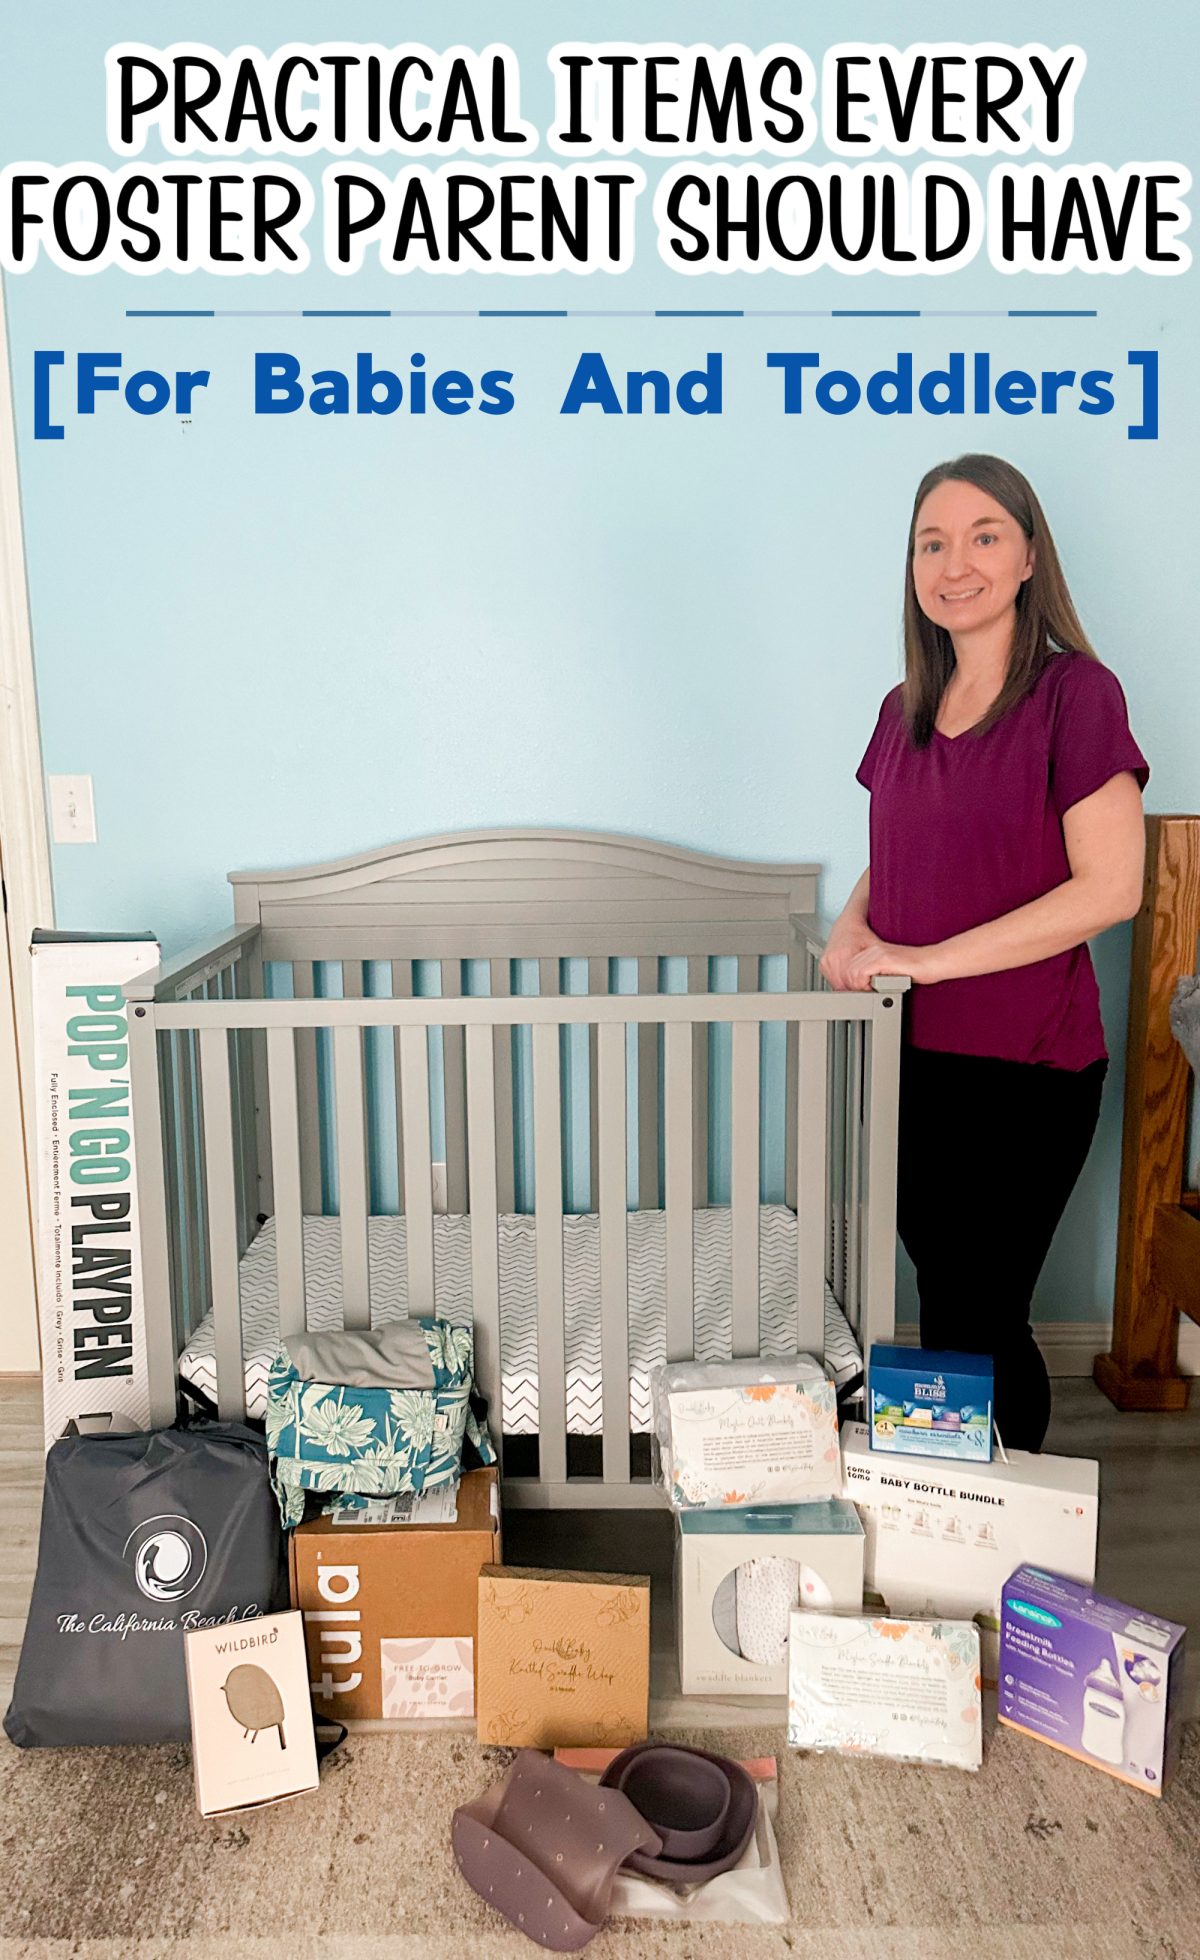 Practical Items Every Foster Parent Should Have On Hand [For Babies And Toddlers] (1)